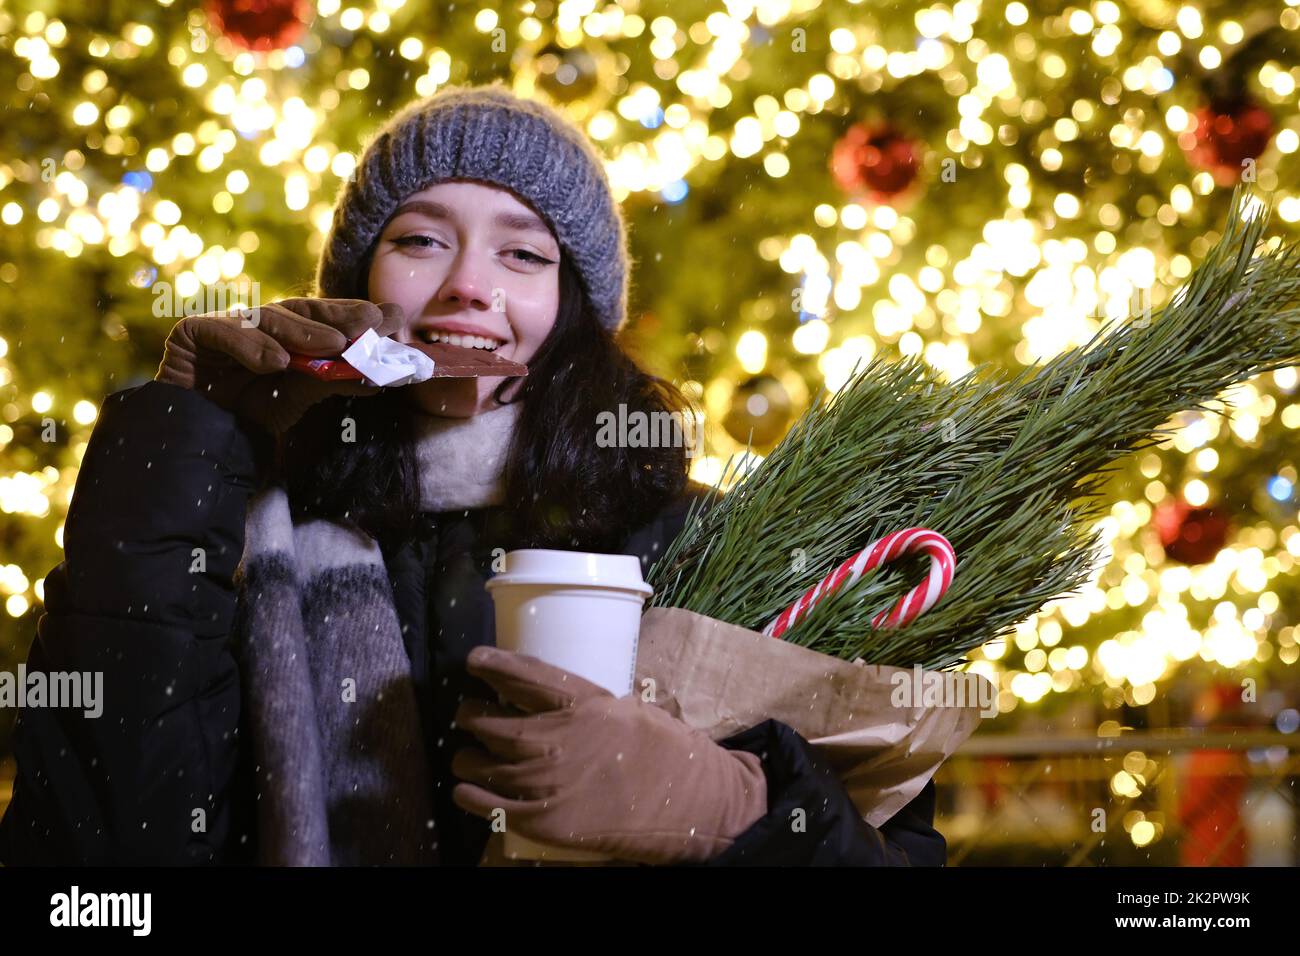 young beautiful happy Face of smiling girl posing. Christmas tree Happy New Year eating Chocolate with coffe cup Stock Photo